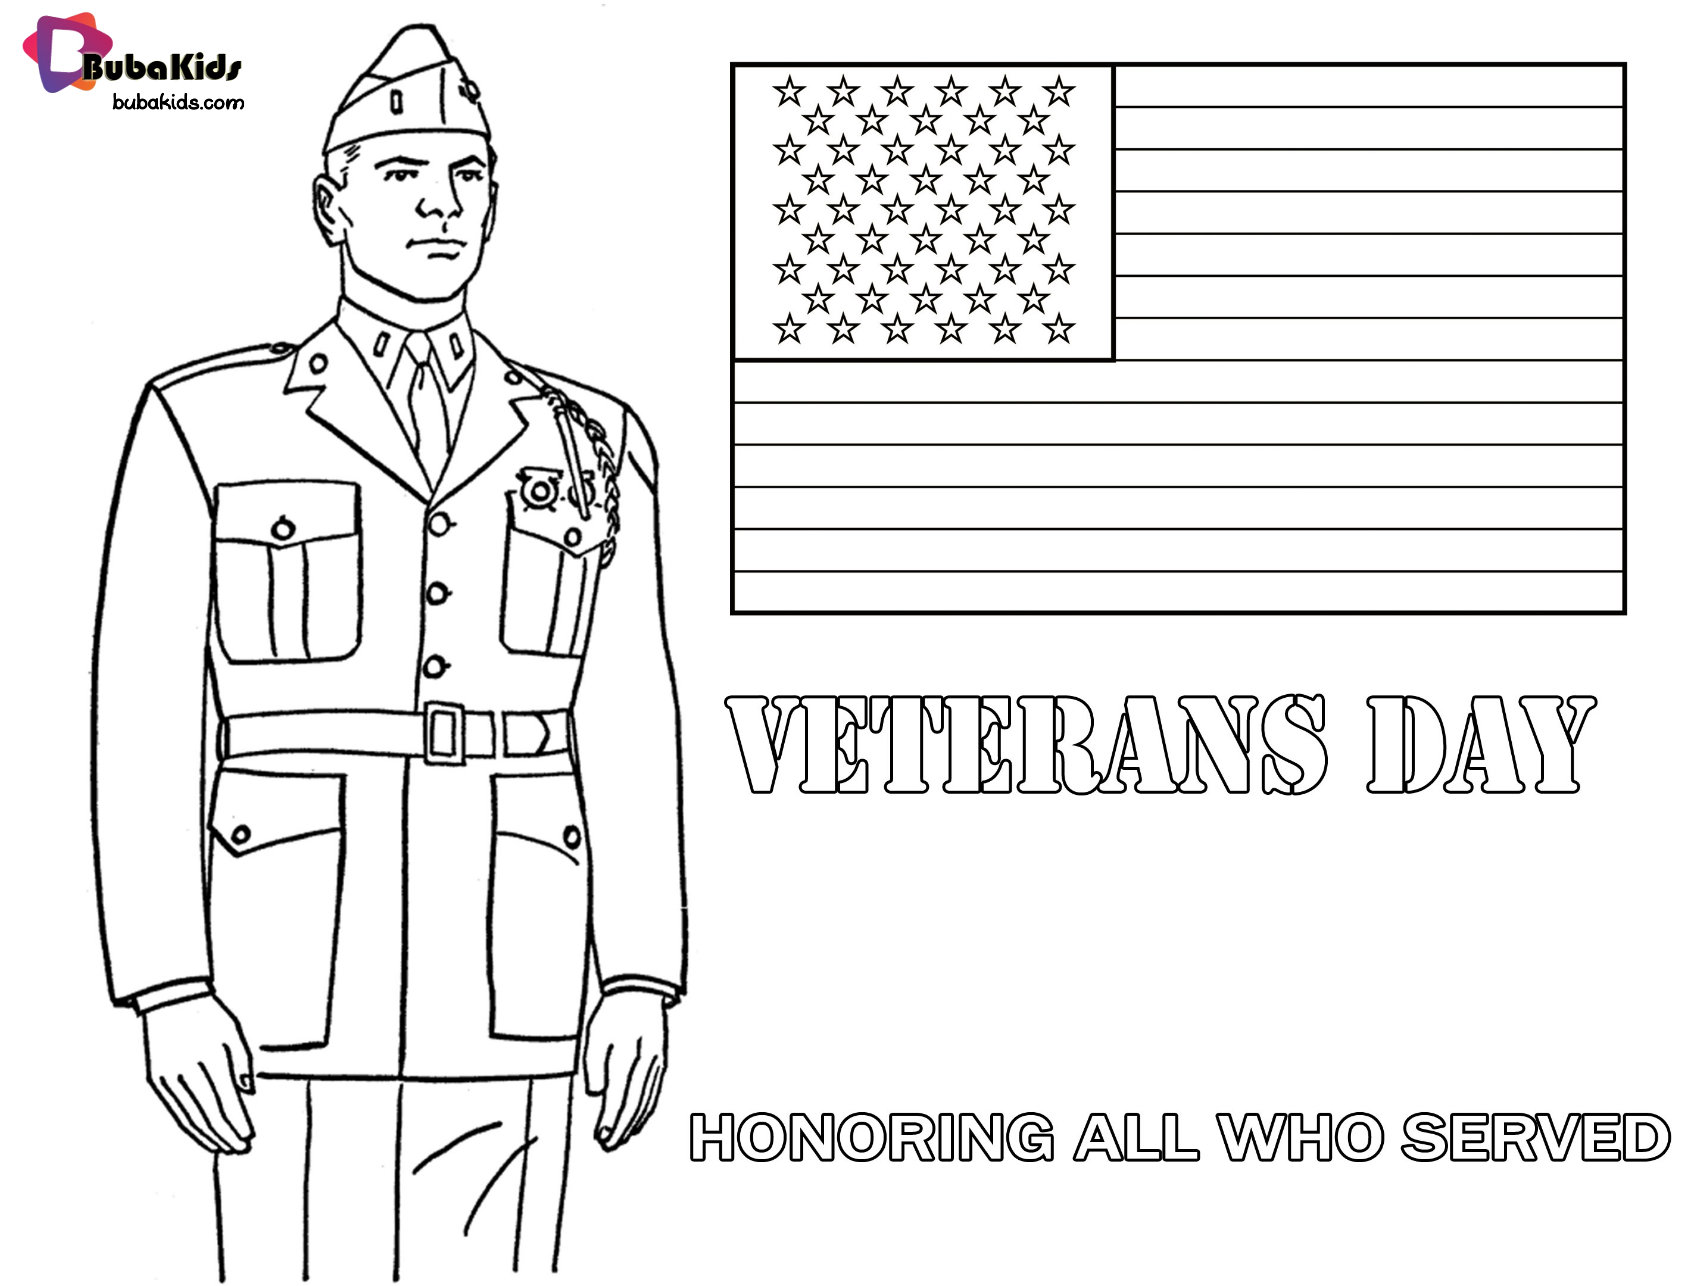 Veterans Day Honoring All Who Served coloring page. Wallpaper